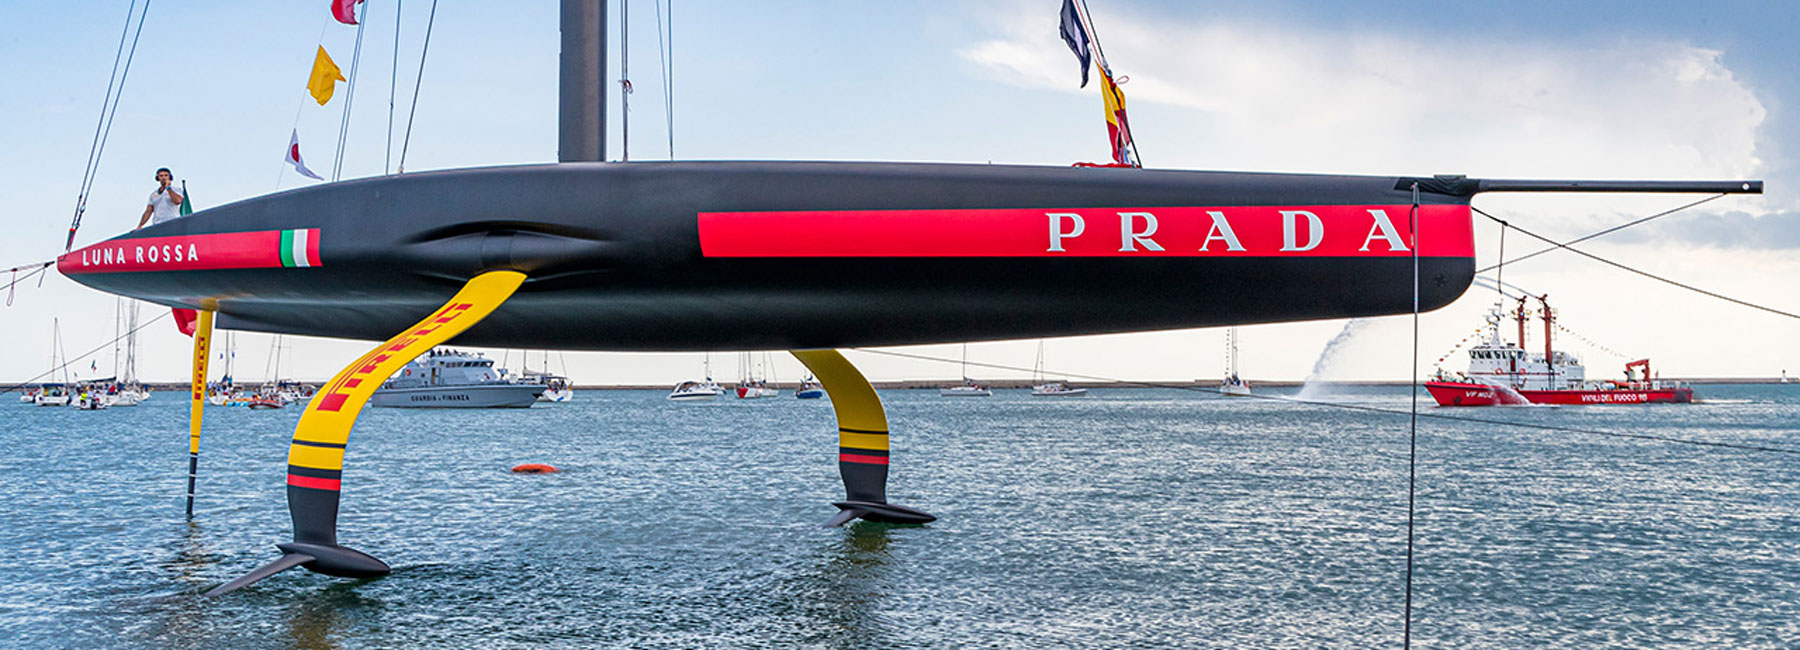 prada debuts new luna rossa AC75 boat monohull with 2 carbonfiber arms